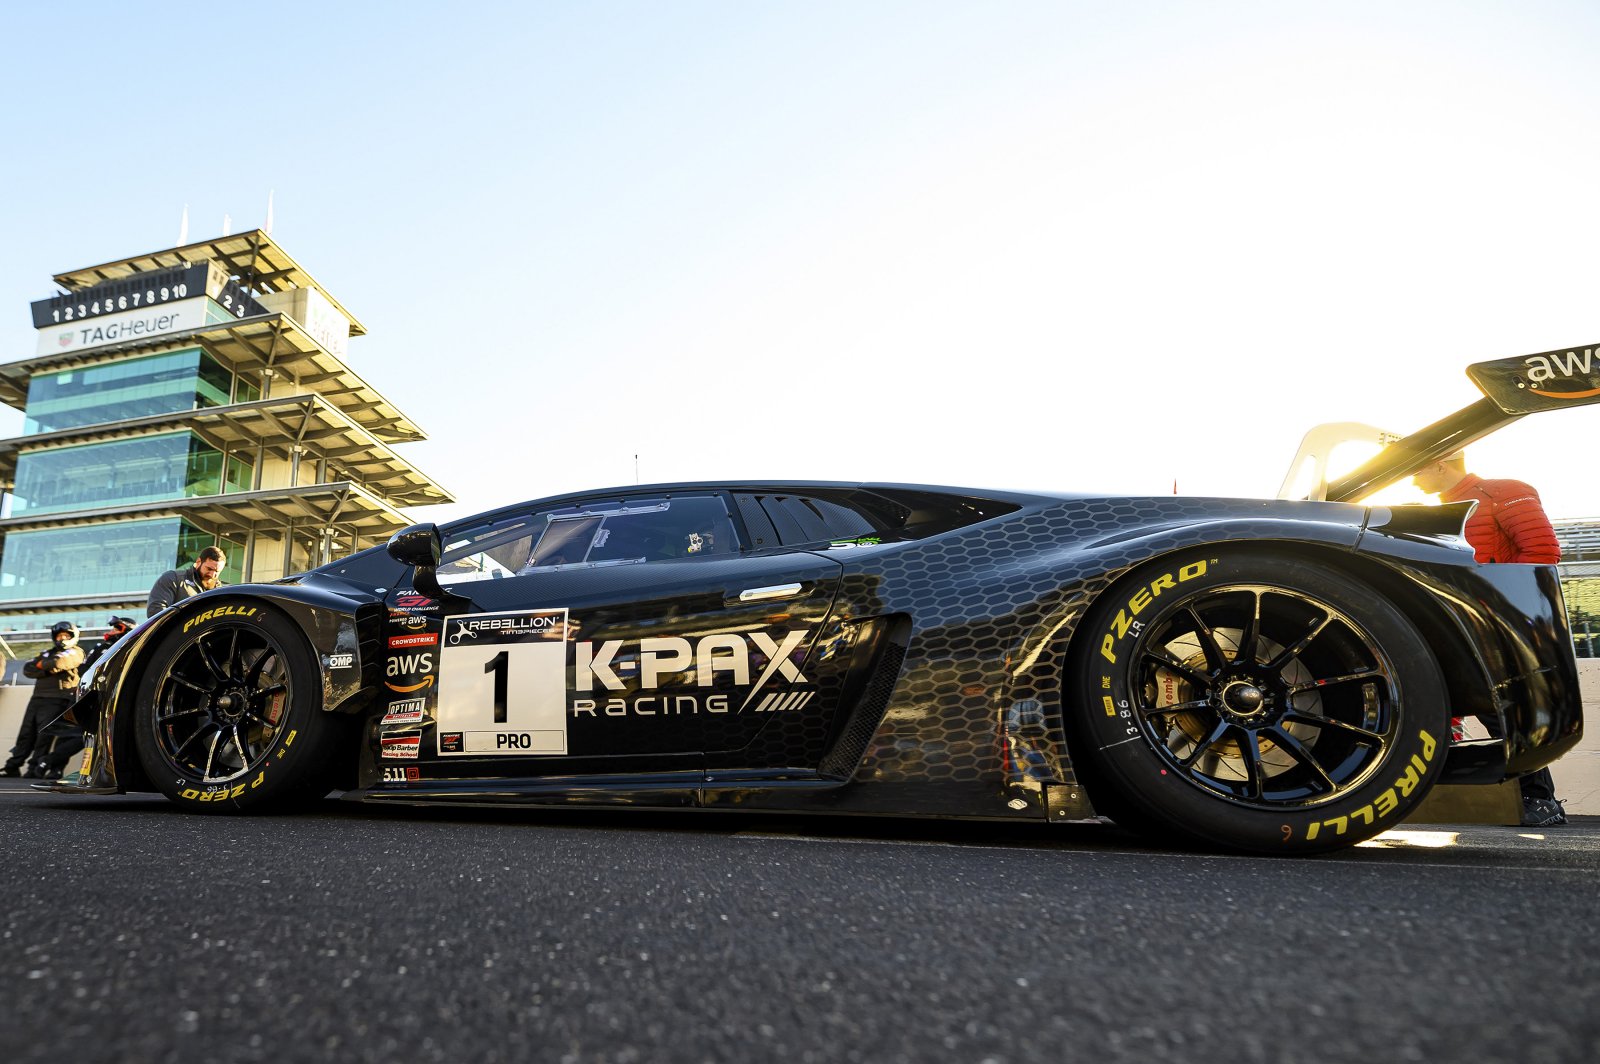 K-PAX Racing Names 2022 Indy Line-Up: Team welcomes back Mapelli; Perera makes team debut